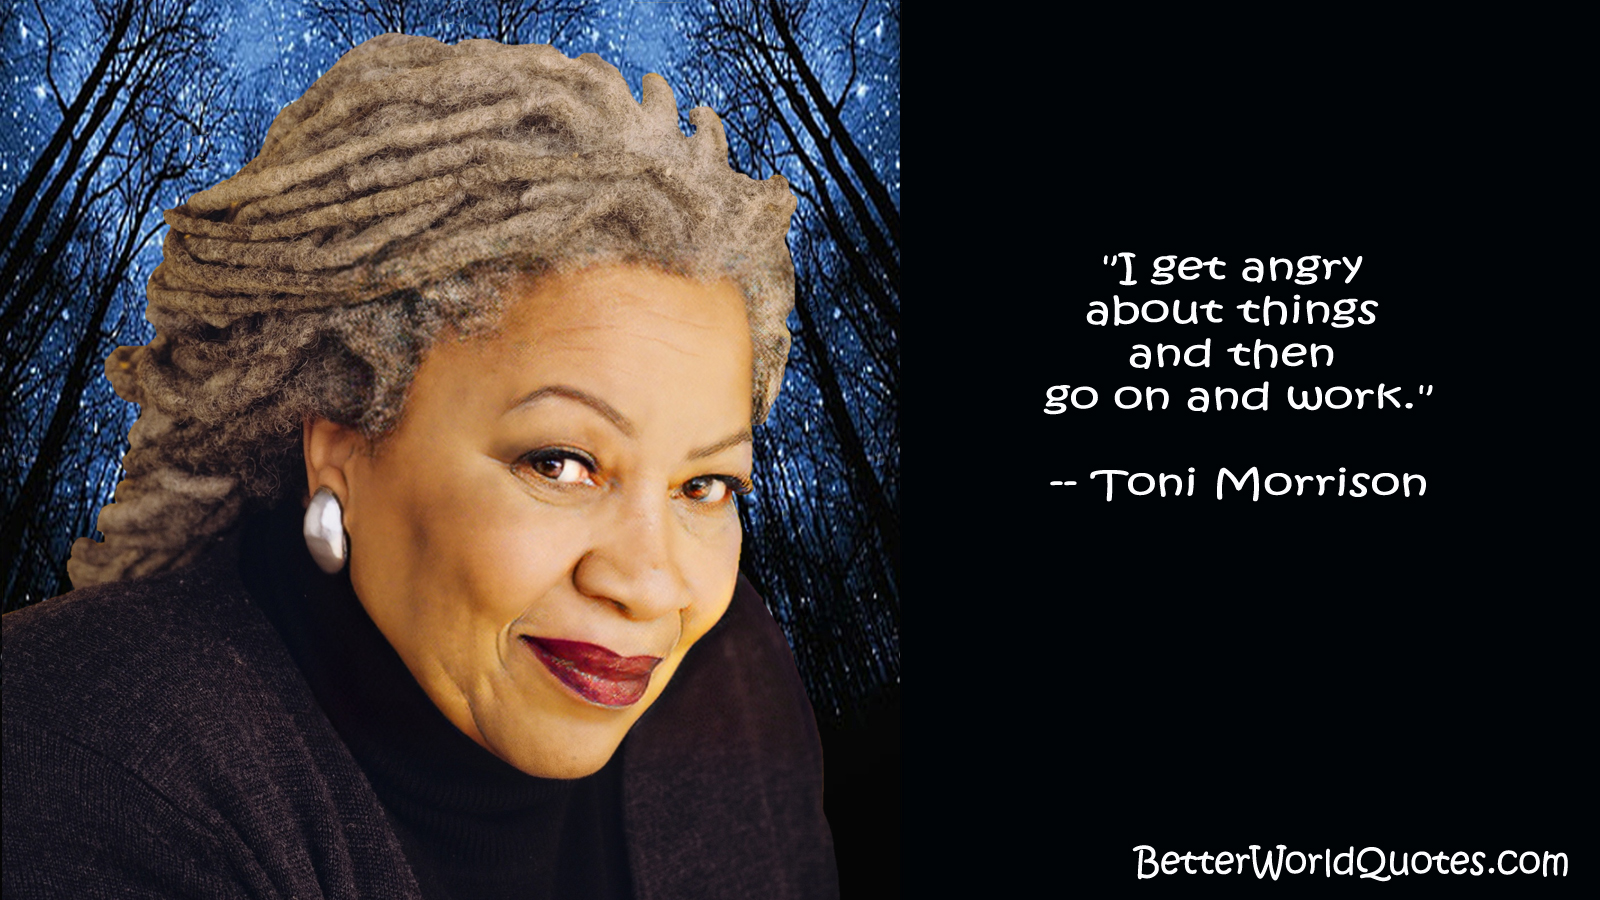 Toni Morrison: I get angry about things and then go on and work.